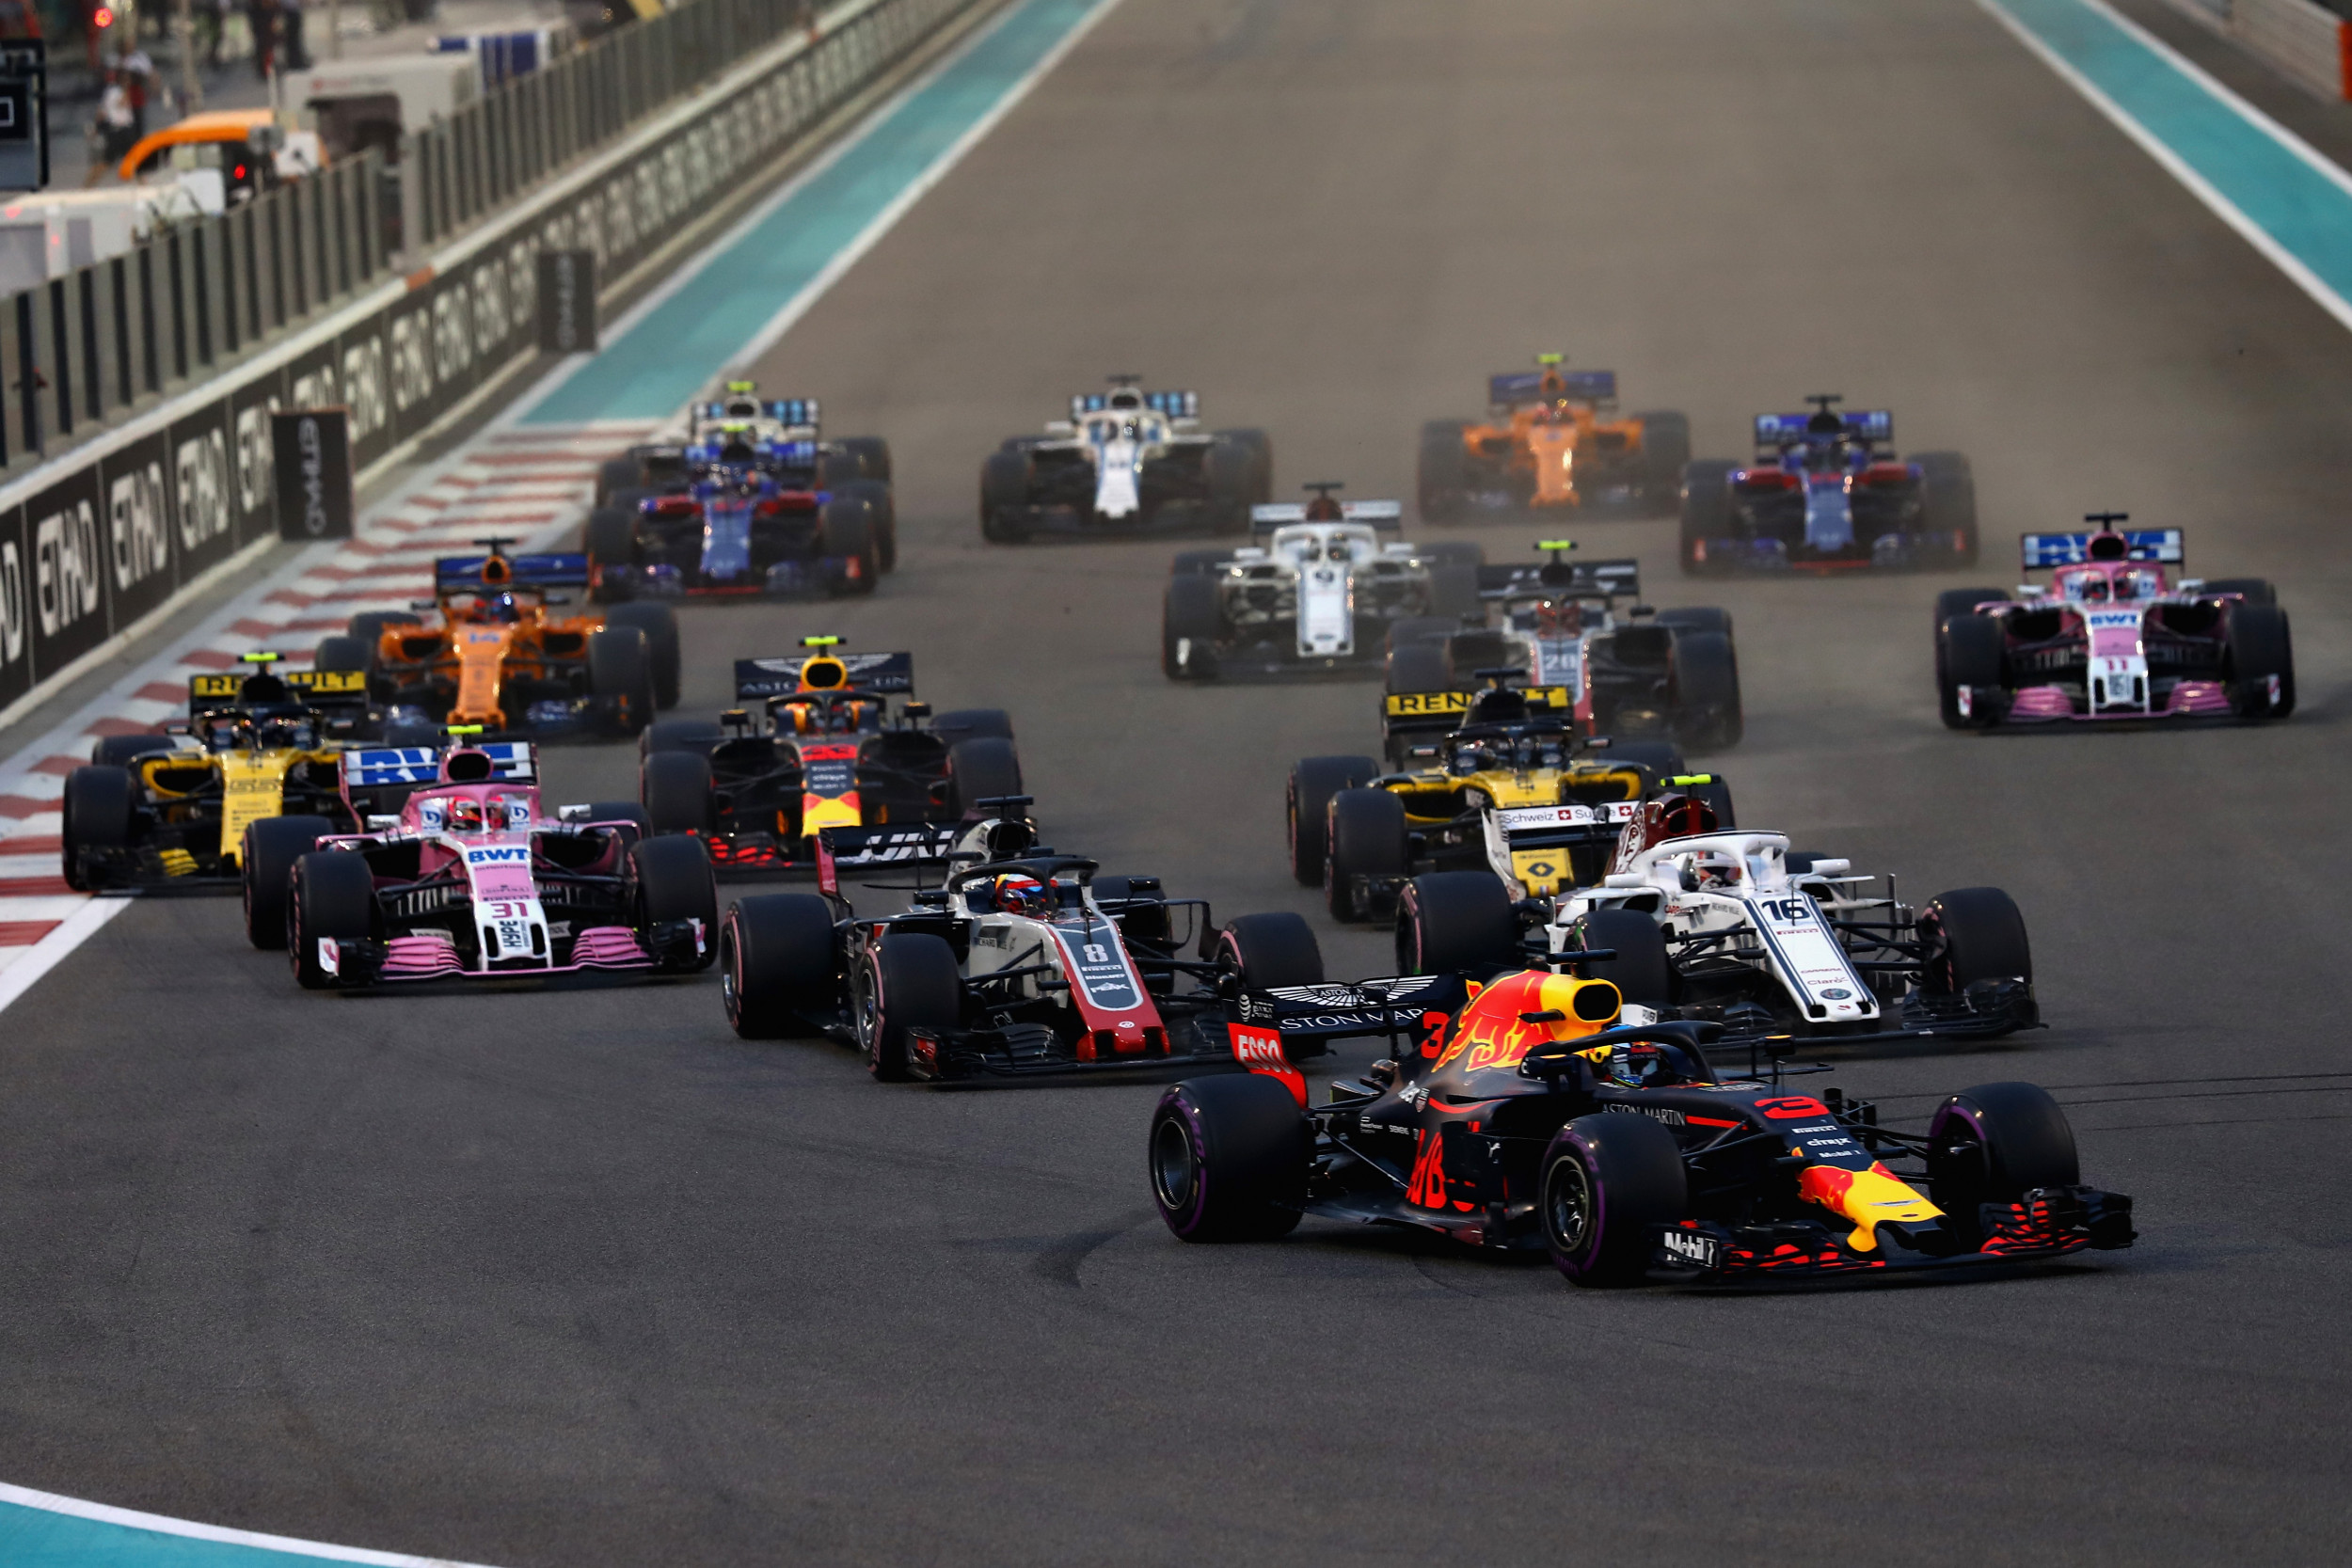 F1 Abu Dhabi Grand Prix 2021 Race Start Time and How to Watch